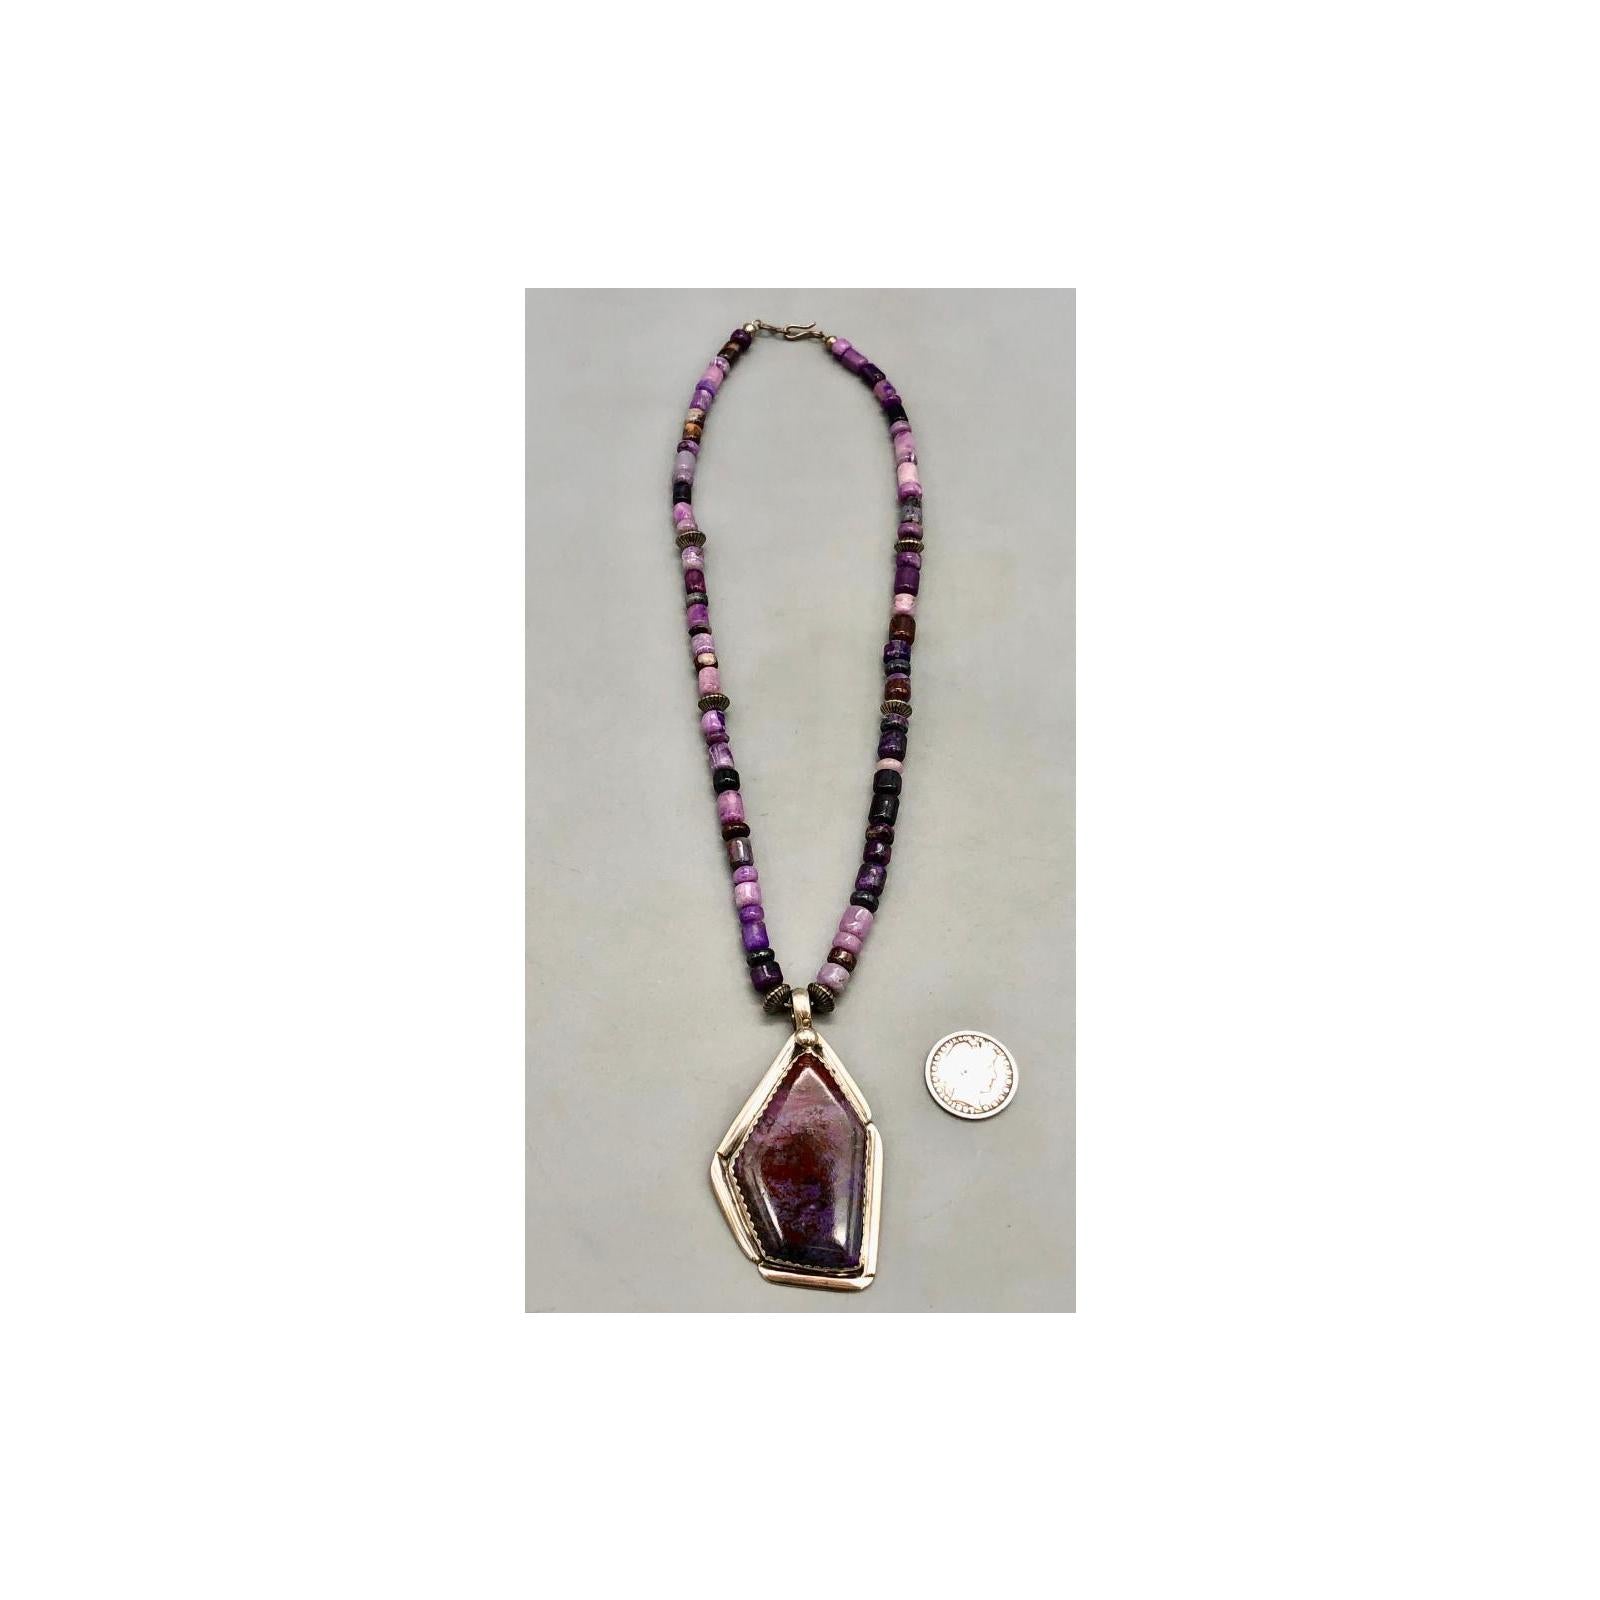 Sugalite Pendant and Necklace.